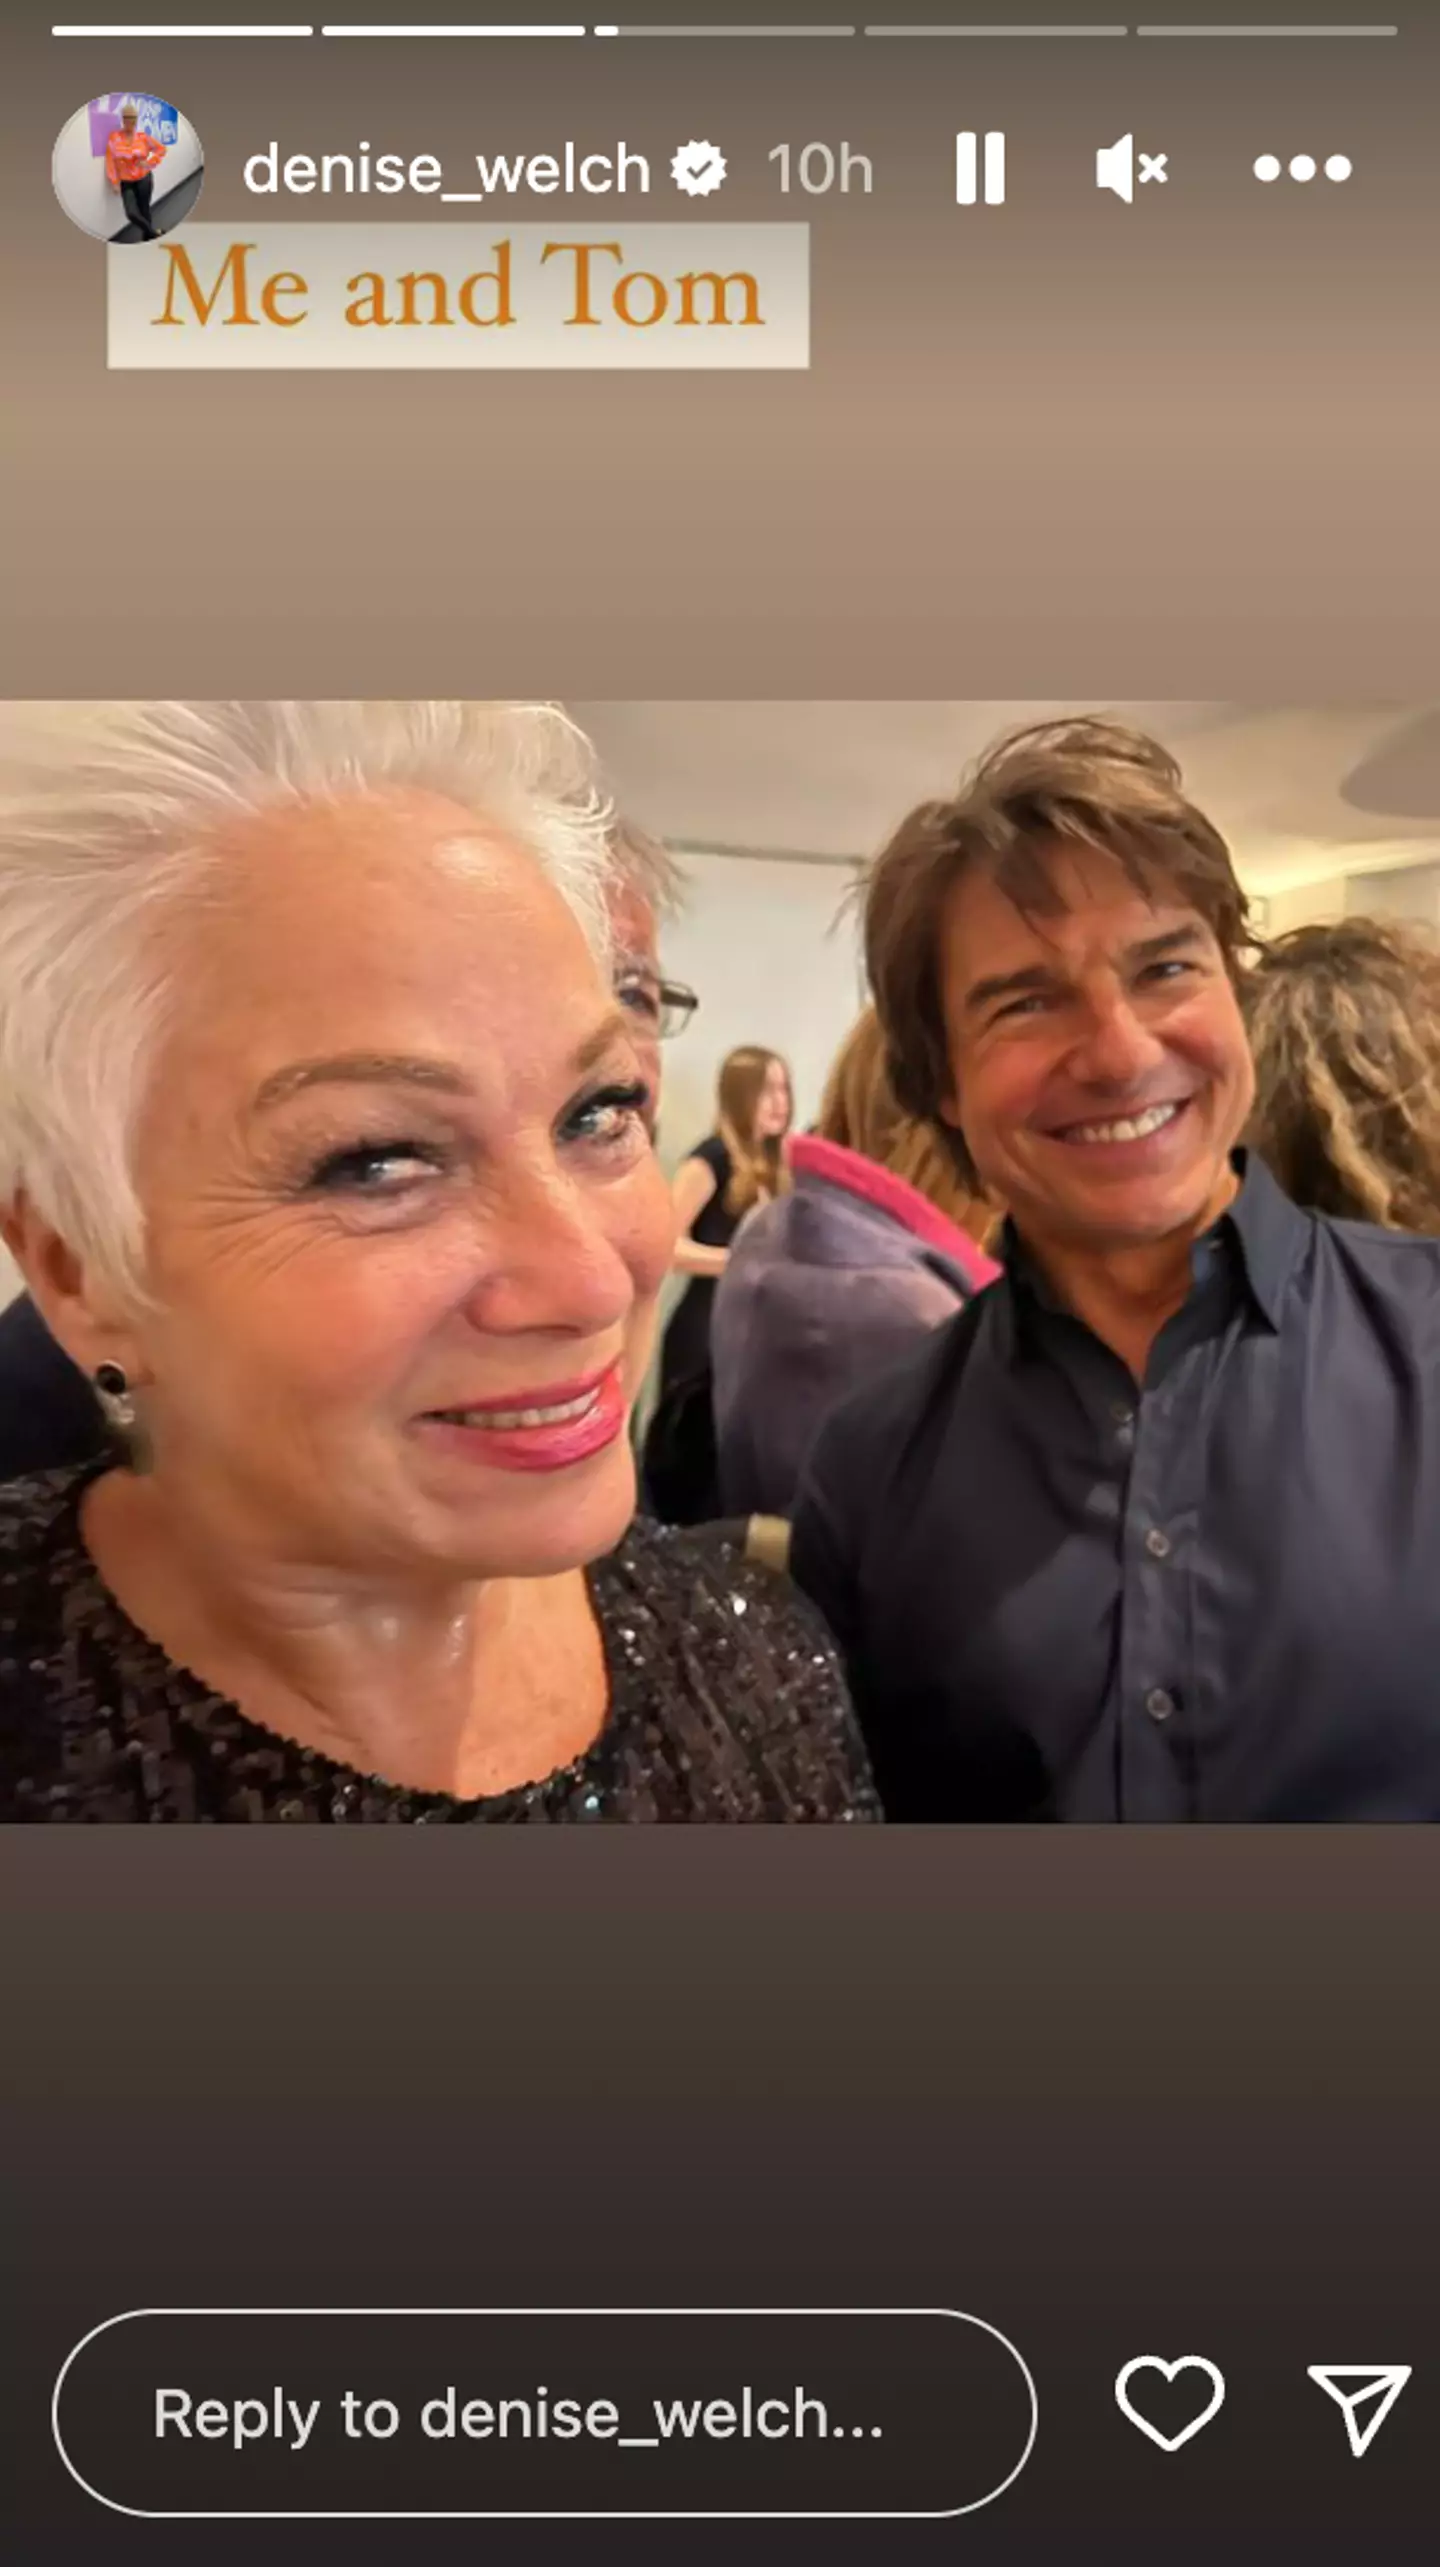 The Loose Women star even posed with a starstruck fan… oh wait, that’s Tom Cruise,